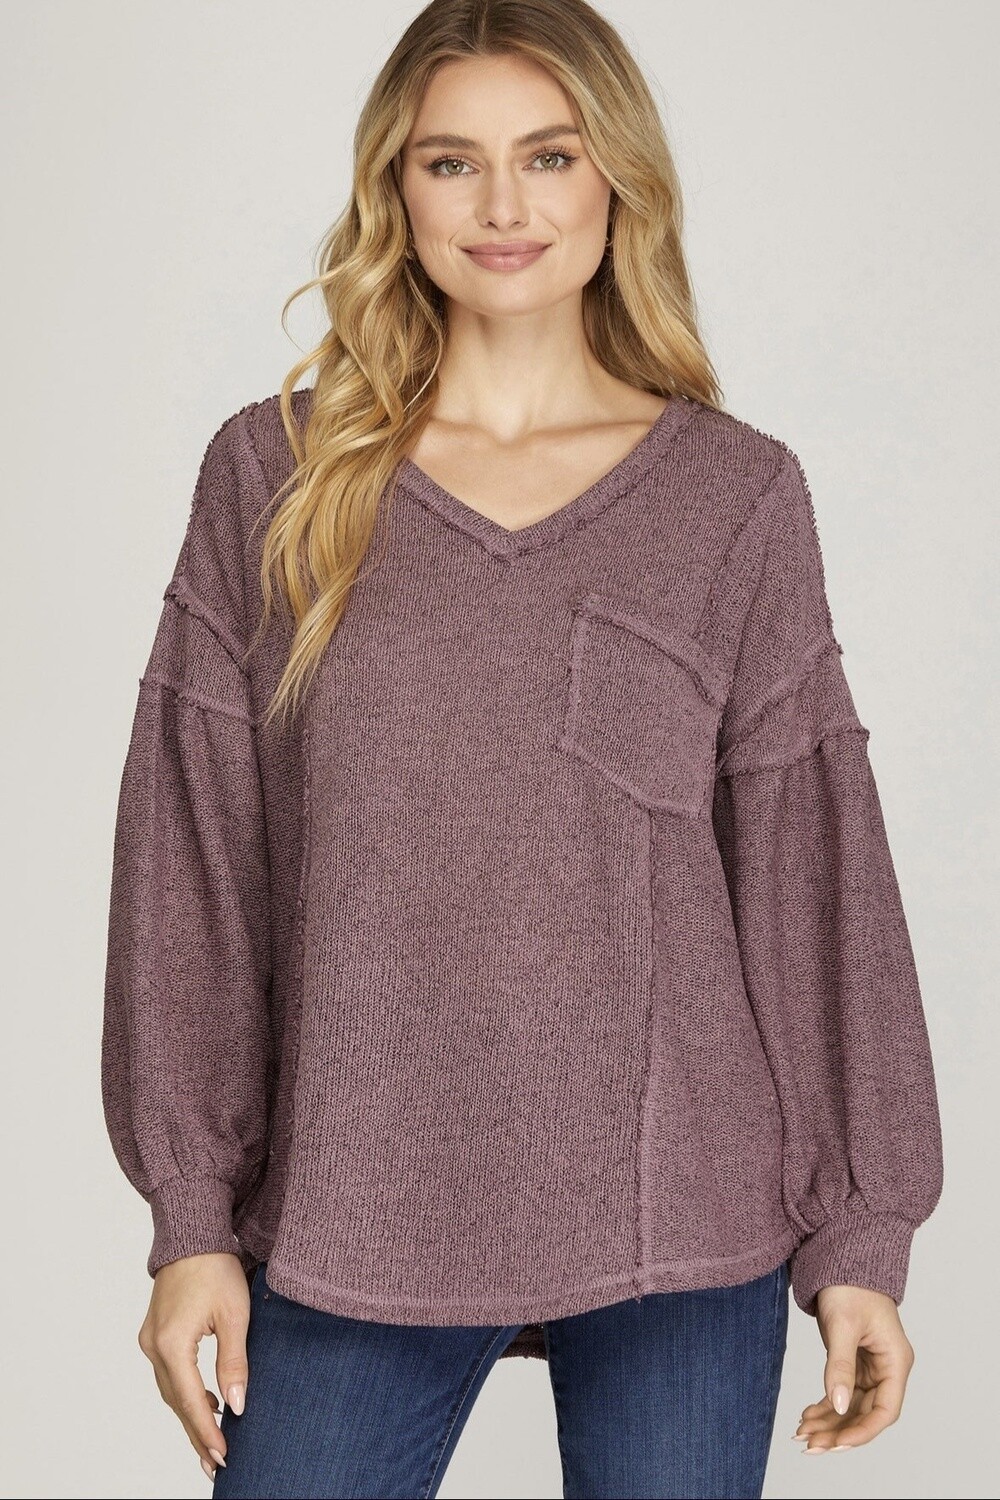 Puff Sleeve Knit Top - Dusty Mauve